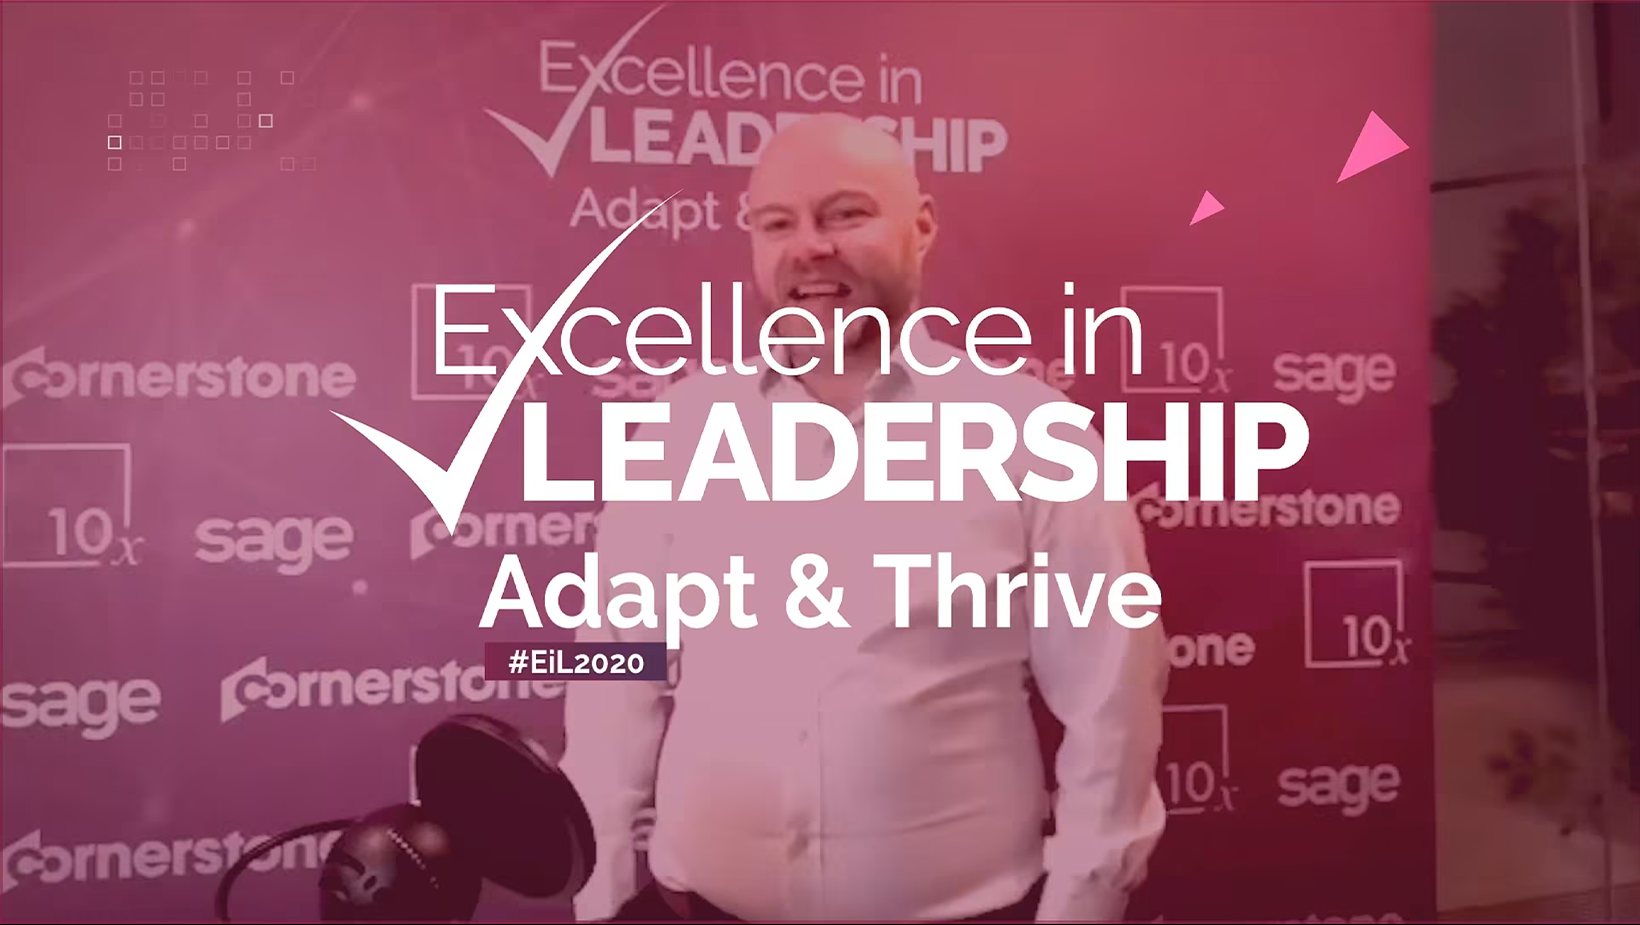 Excellence in Leadership 2020 Conference Video Highlights